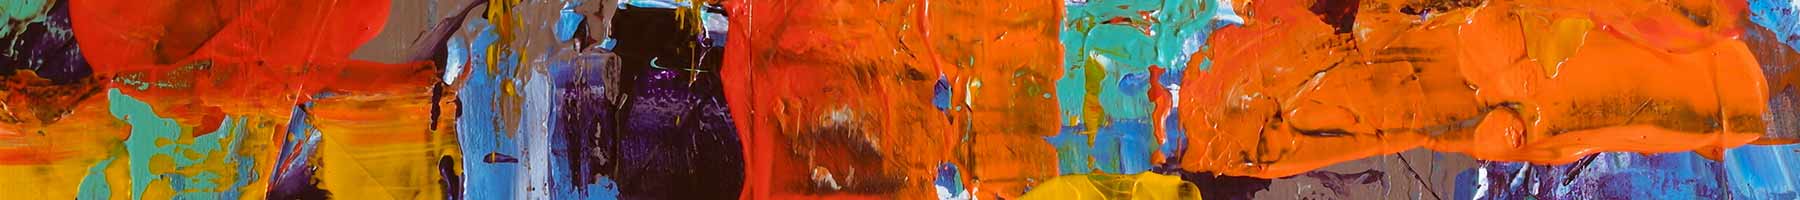 Abstract painting in red, orange and navy tones